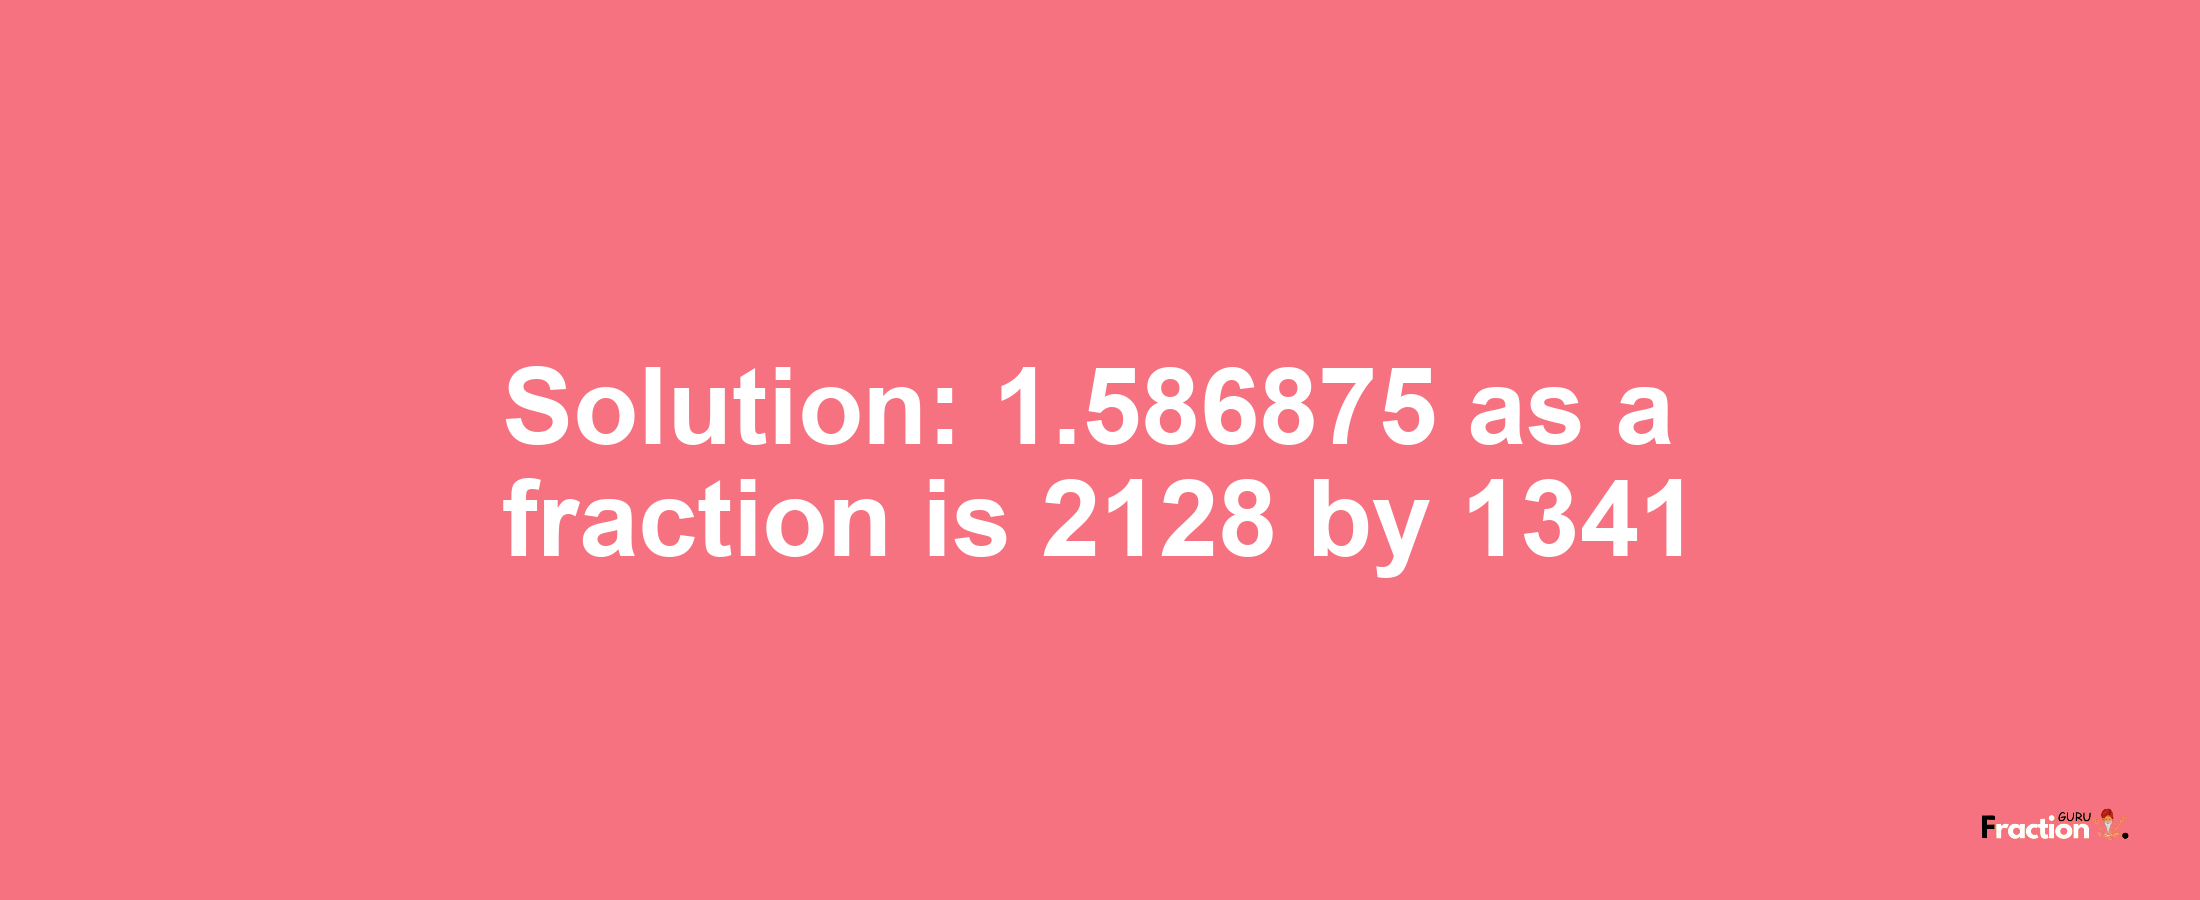 Solution:1.586875 as a fraction is 2128/1341